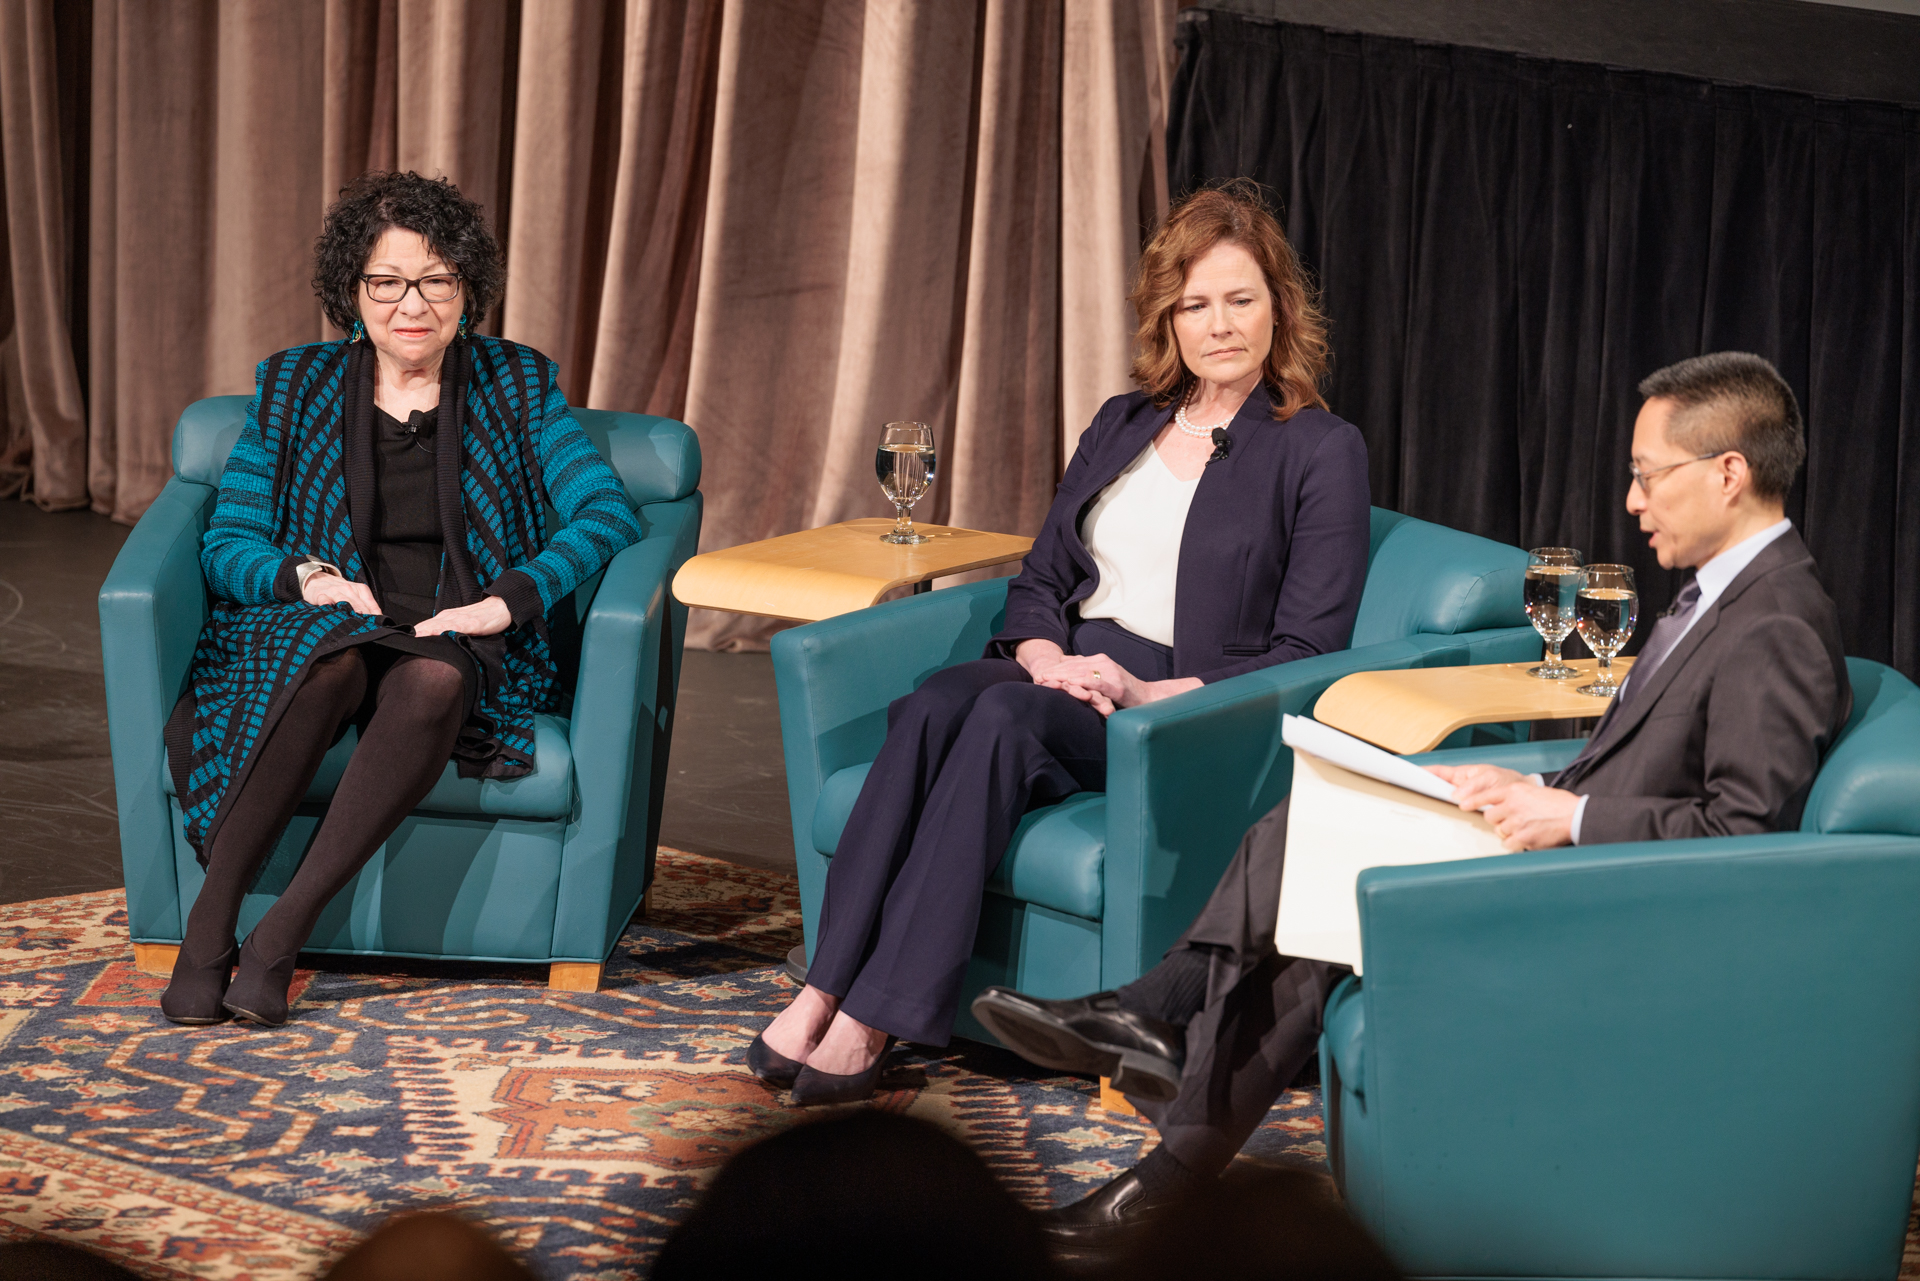 From left, Associate Justices Sonia Sotomayor and Amy Coney Barrett discussed civic engagement with moderator Eric Liu. 